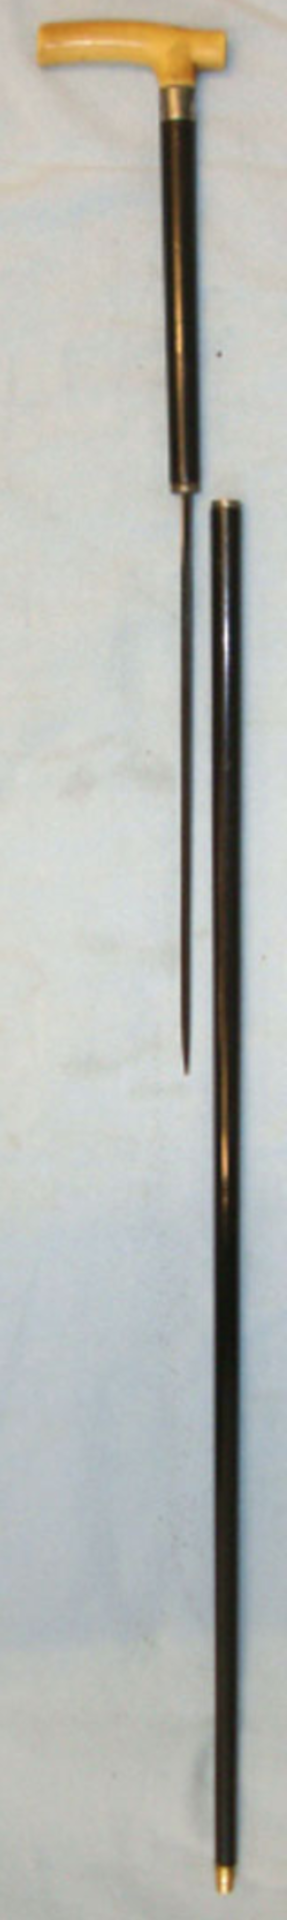 WW1 British Officer's Lacquered Wood Sword Stick With Ferrule Engraved To 'Captain Chas Alford MM - Image 2 of 3